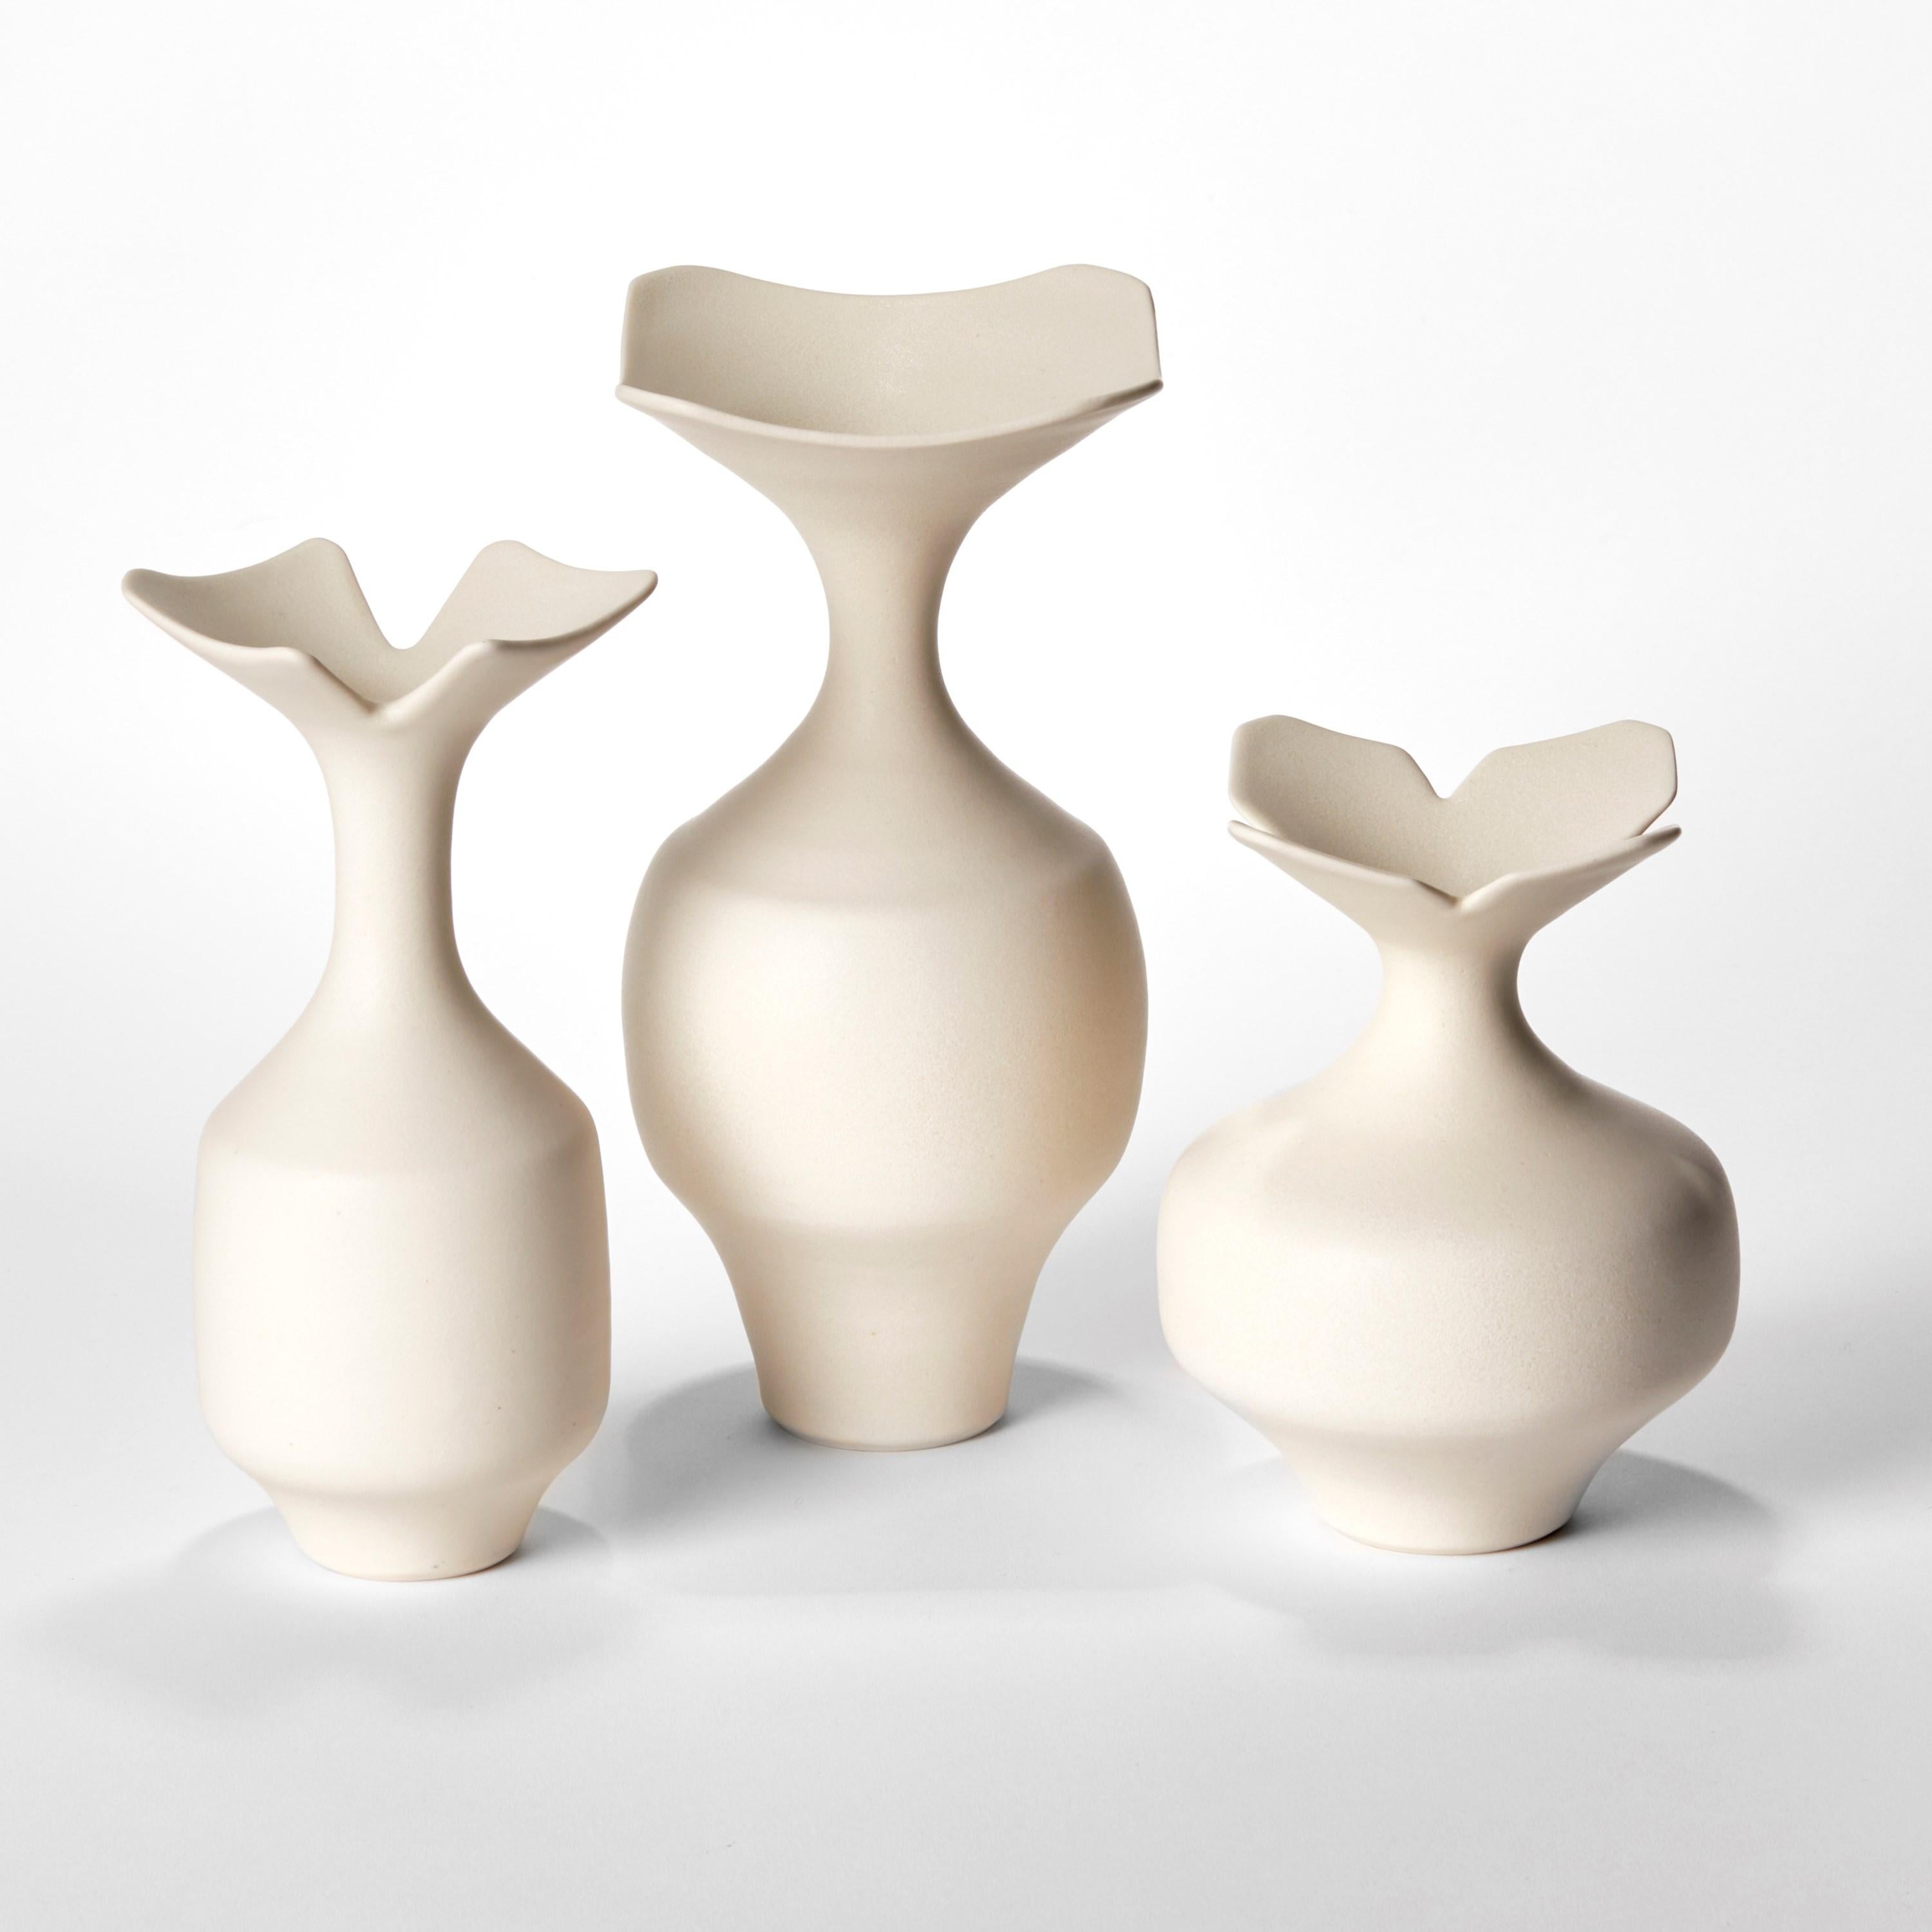 'Butter Trio’ is a unique collection of porcelain sculptural vessels by the British artist, Vivienne Foley.

Left to right in the first image:

Butter Bi-Squared Rim Vase  H 22 cm W 11.5 cm D 10 cm
Butter Tall Squared Vase  H 25 cm W 12 cm D 12